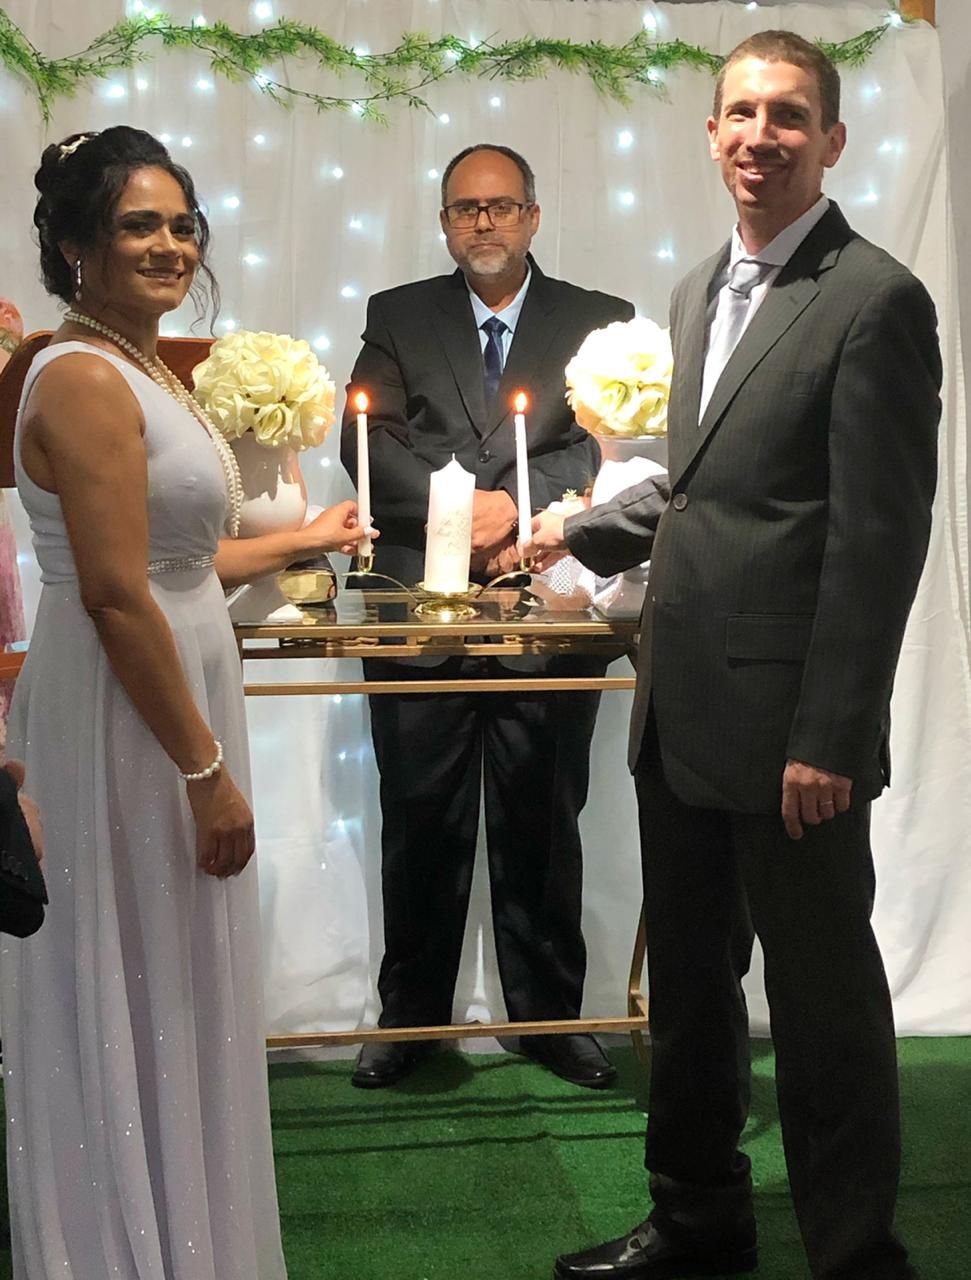 Brazilian bride in white dress lighting wedding candles with American groom